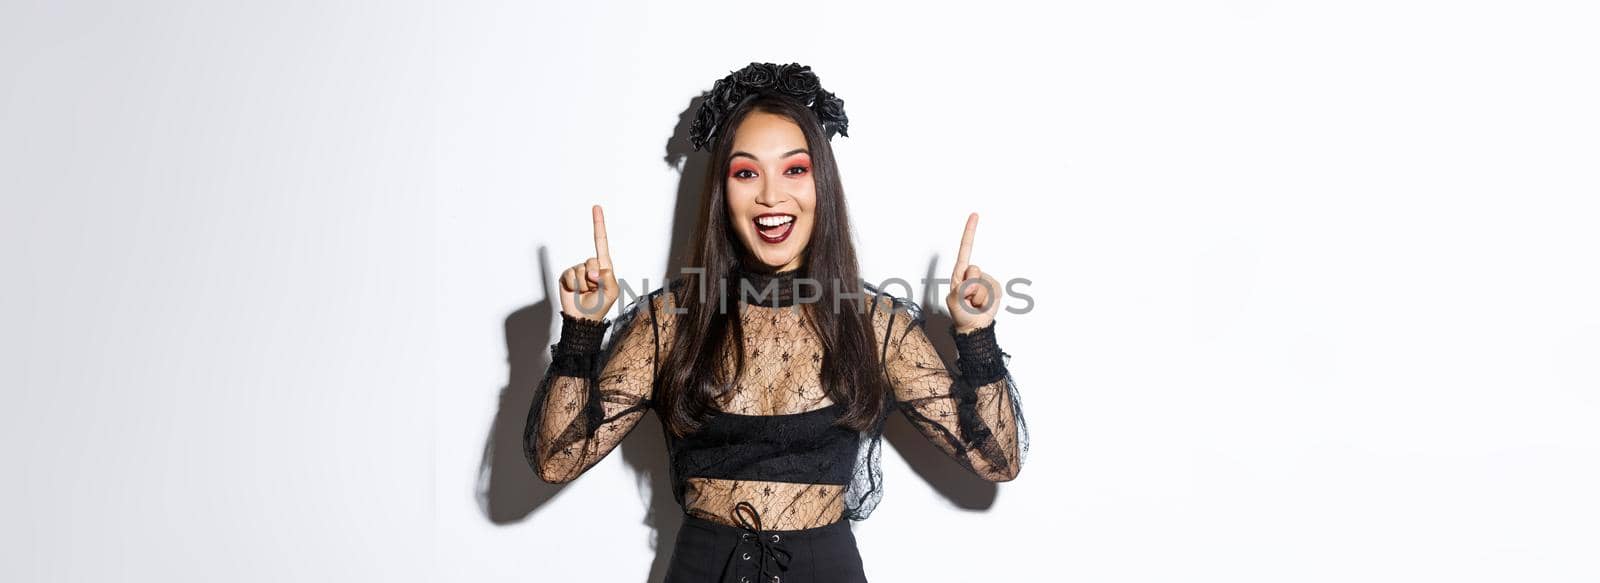 Excited smiling woman celebrating halloween in black gothic dress and wreat. Asian girl wearing witch costume and pointing fingers up, standing white background.